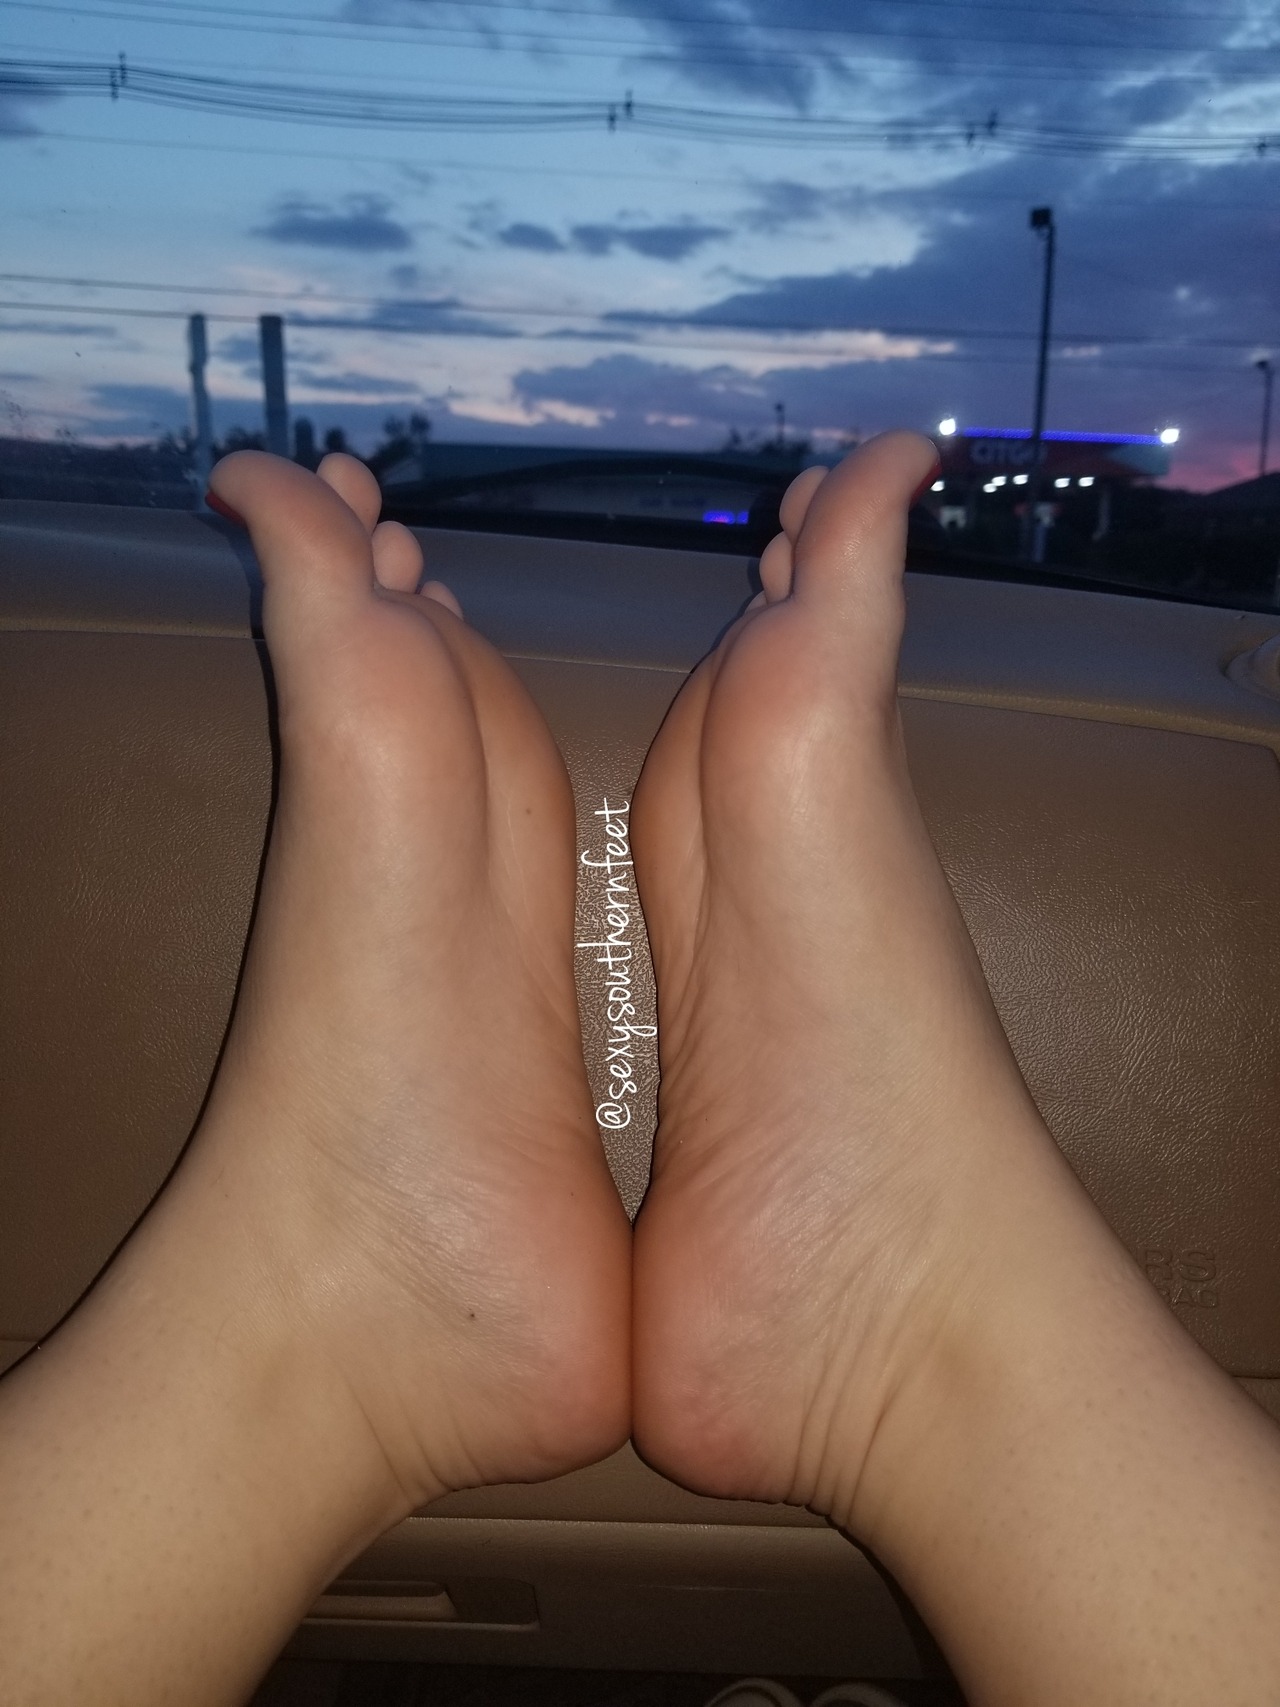 Pretty Feet On Dashboard - Nice and sweaty after a hard workout.